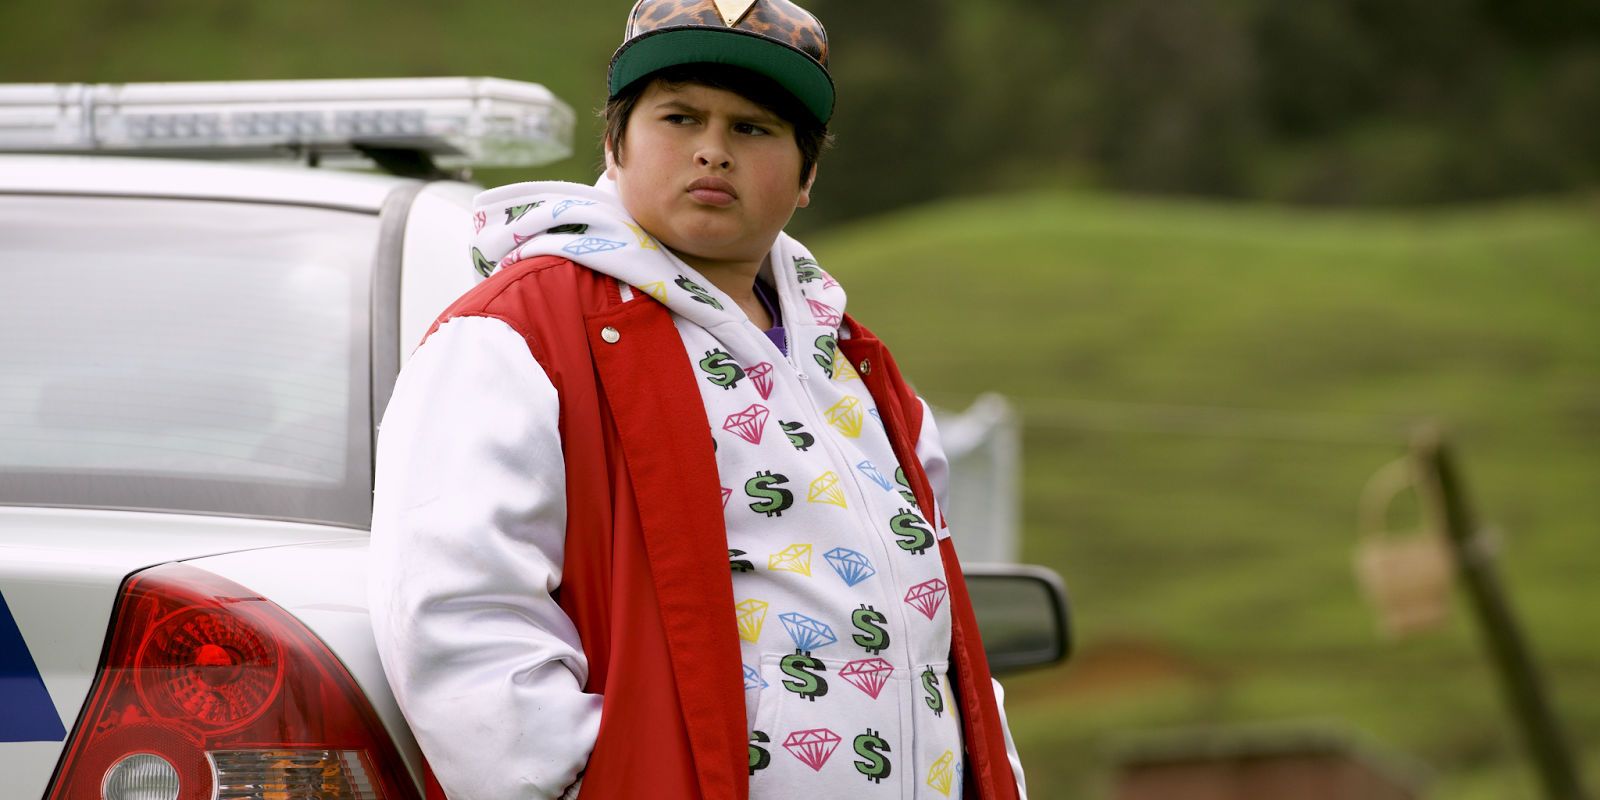 Ricky Baker leaning against a car and turning to his right in Hunt for the Wilderpeople